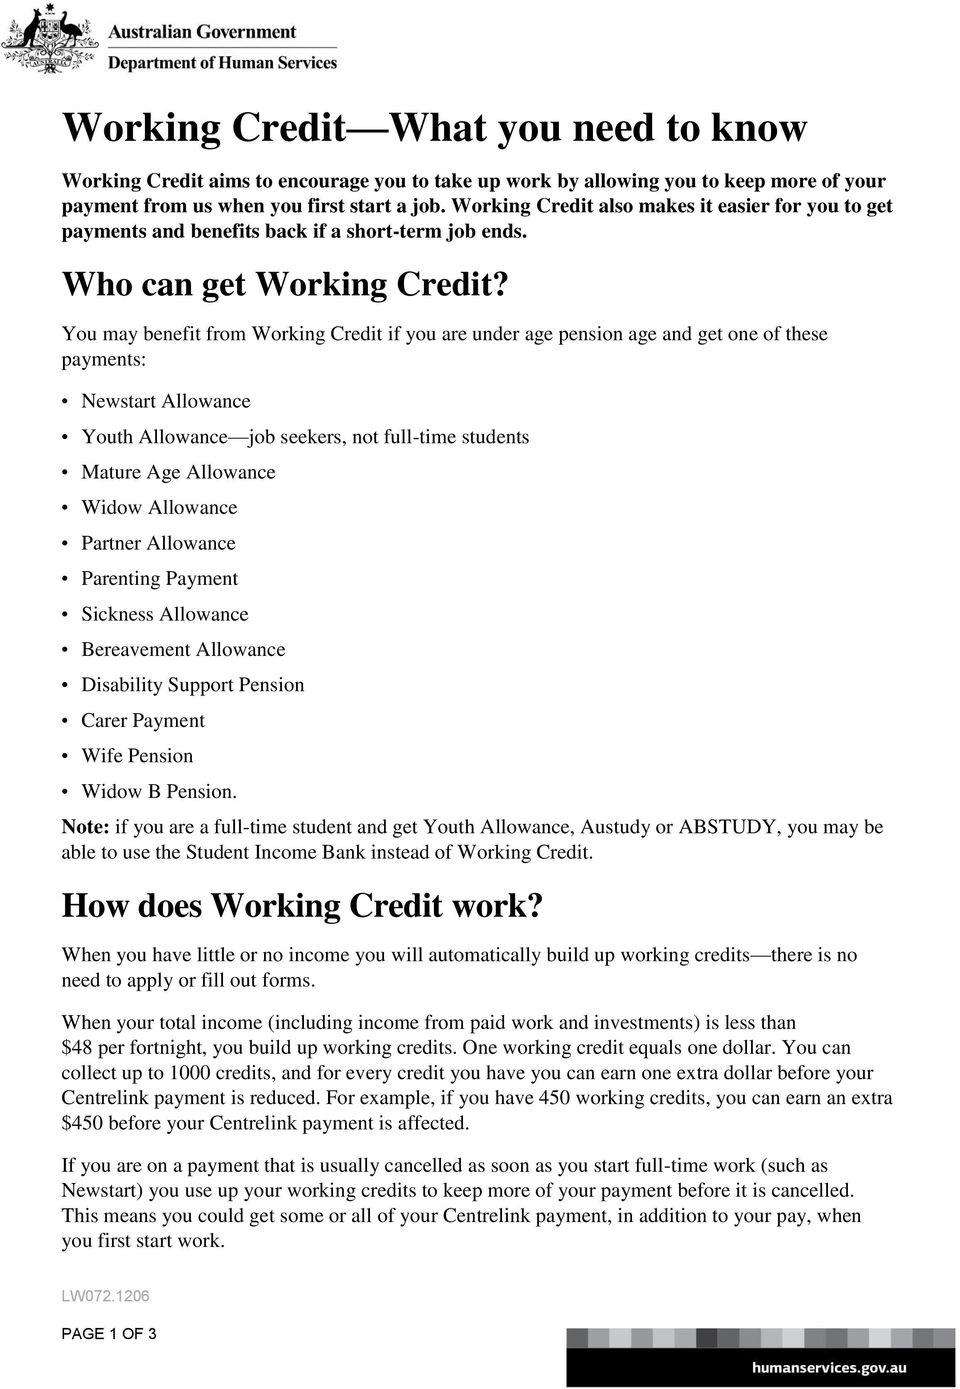 You may benefit from Working Credit if you are under age pension age and get one of these payments: Newstart Allowance Youth Allowance job seekers, not full-time students Mature Age Allowance Widow